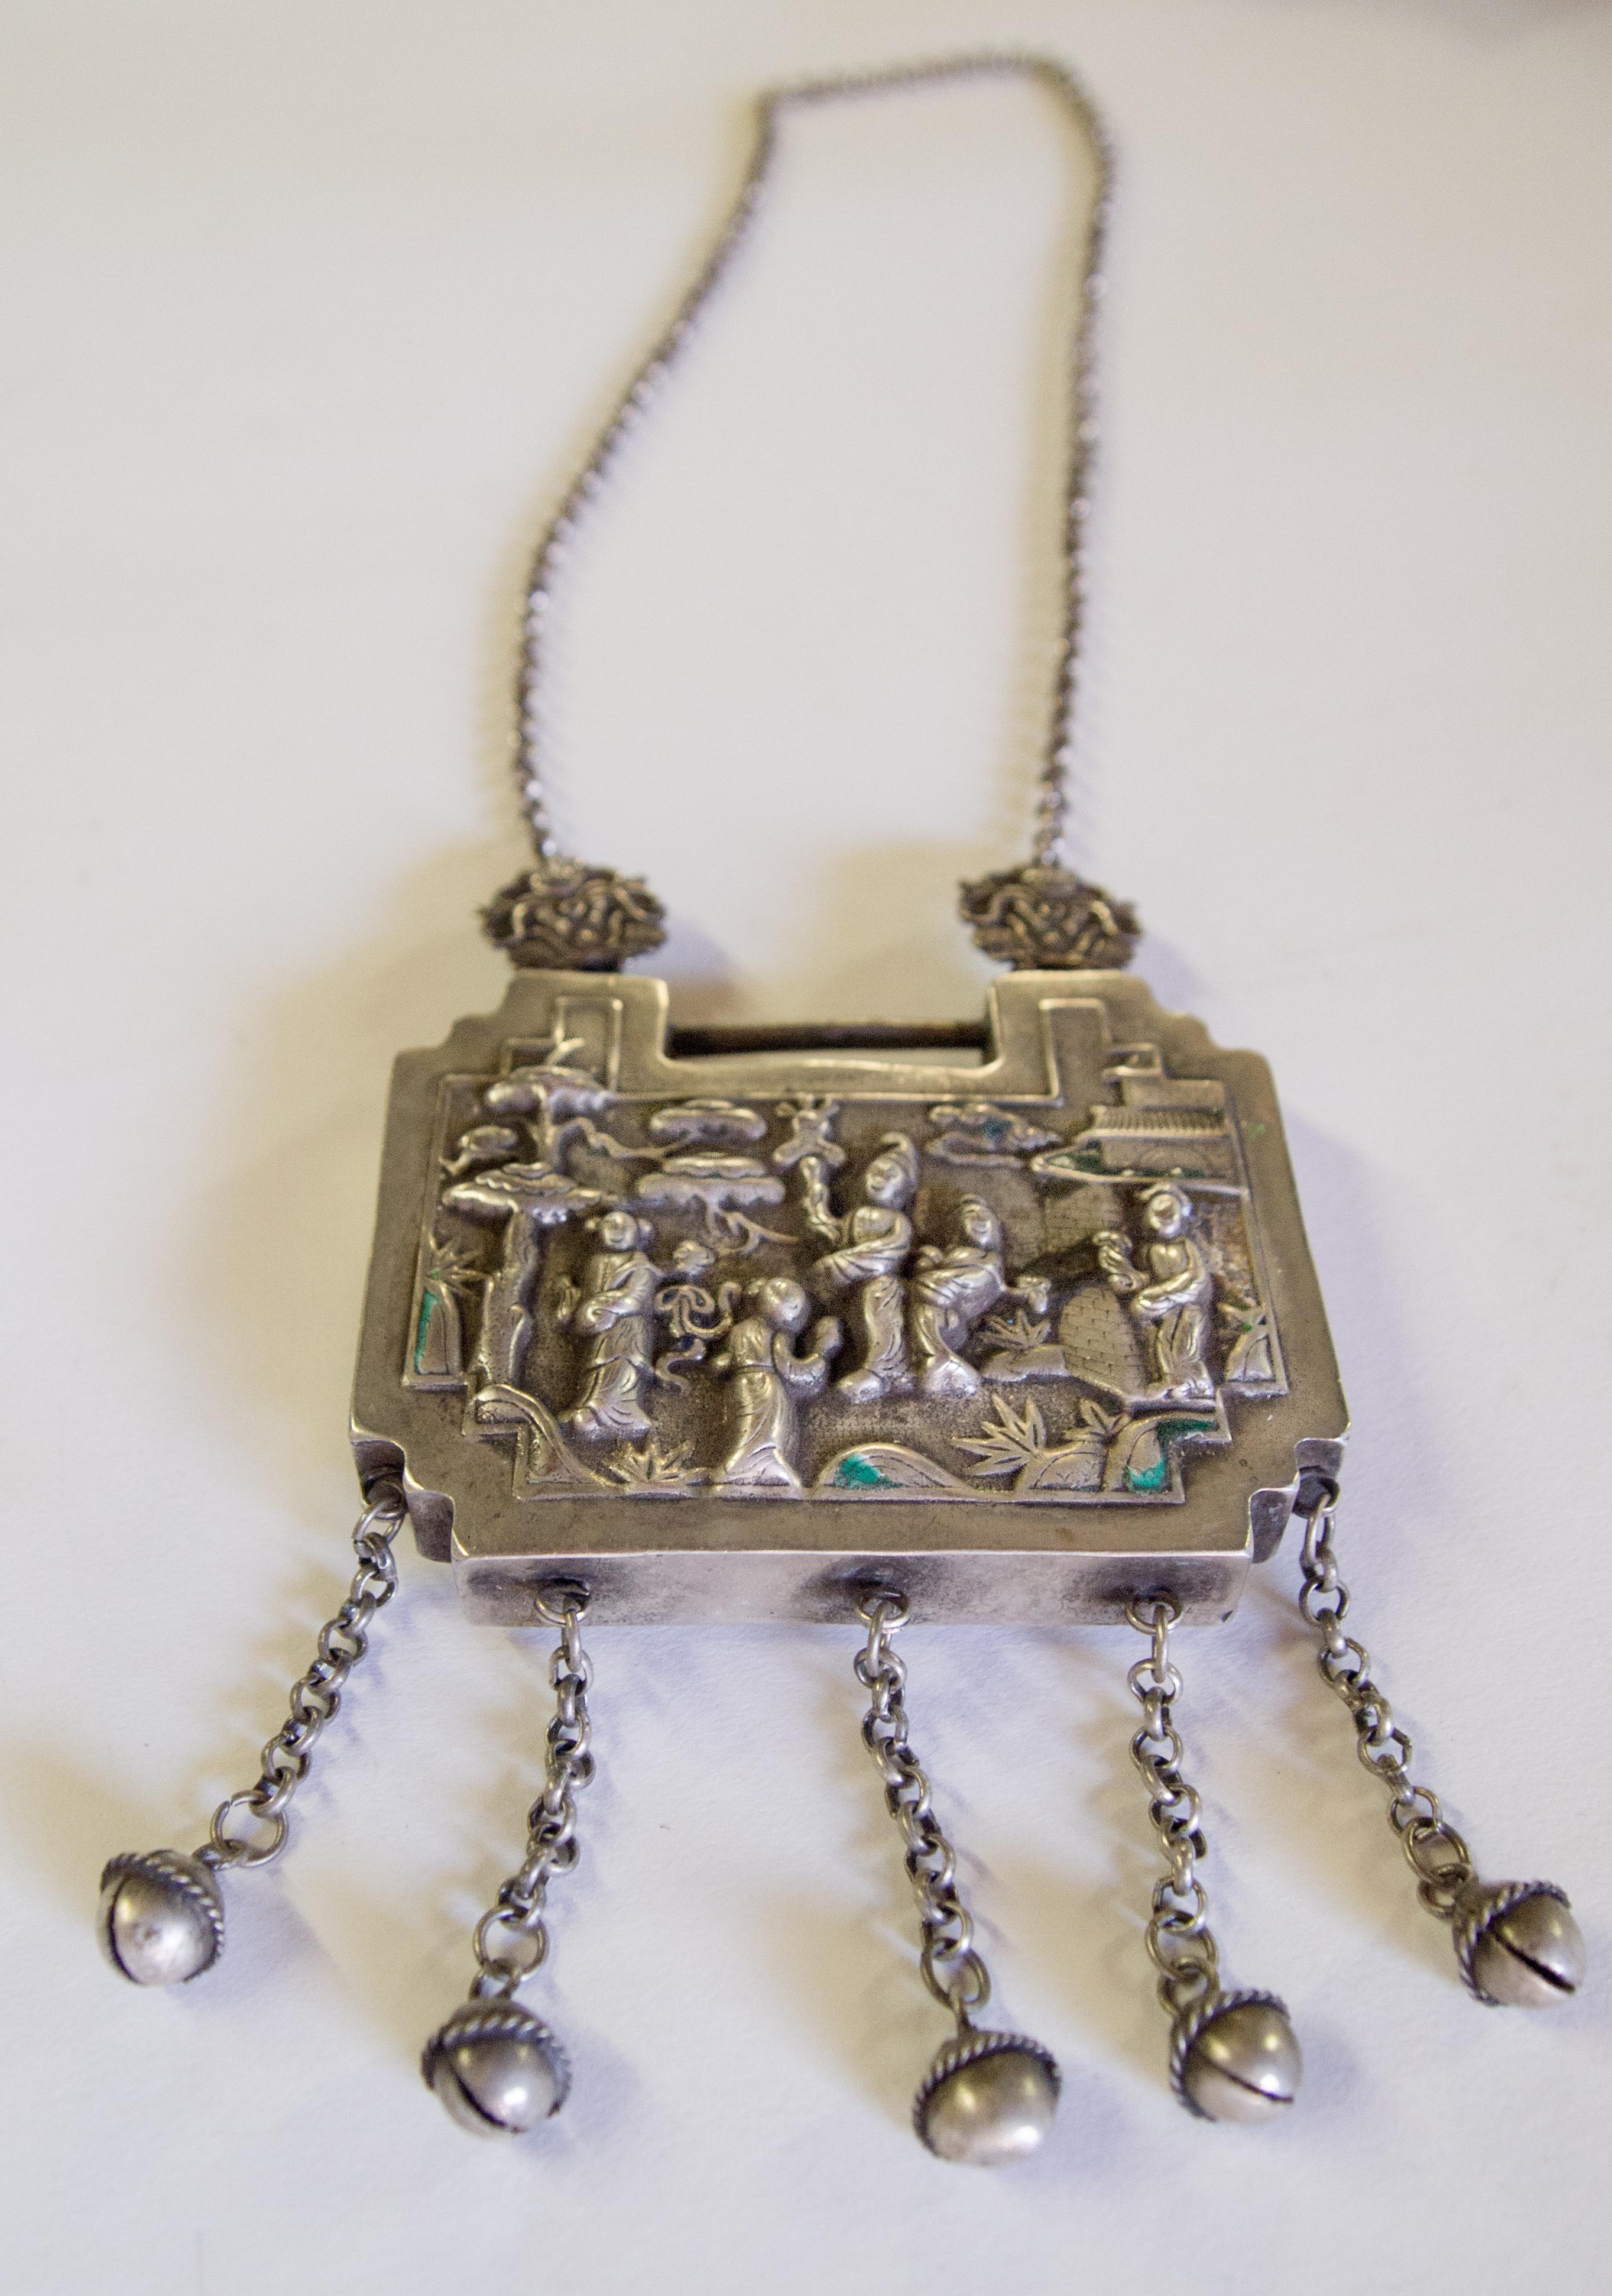 Child Amulet Lock, Silver Alloy, Yao or Hmong of SW China, Early 20th Century 1